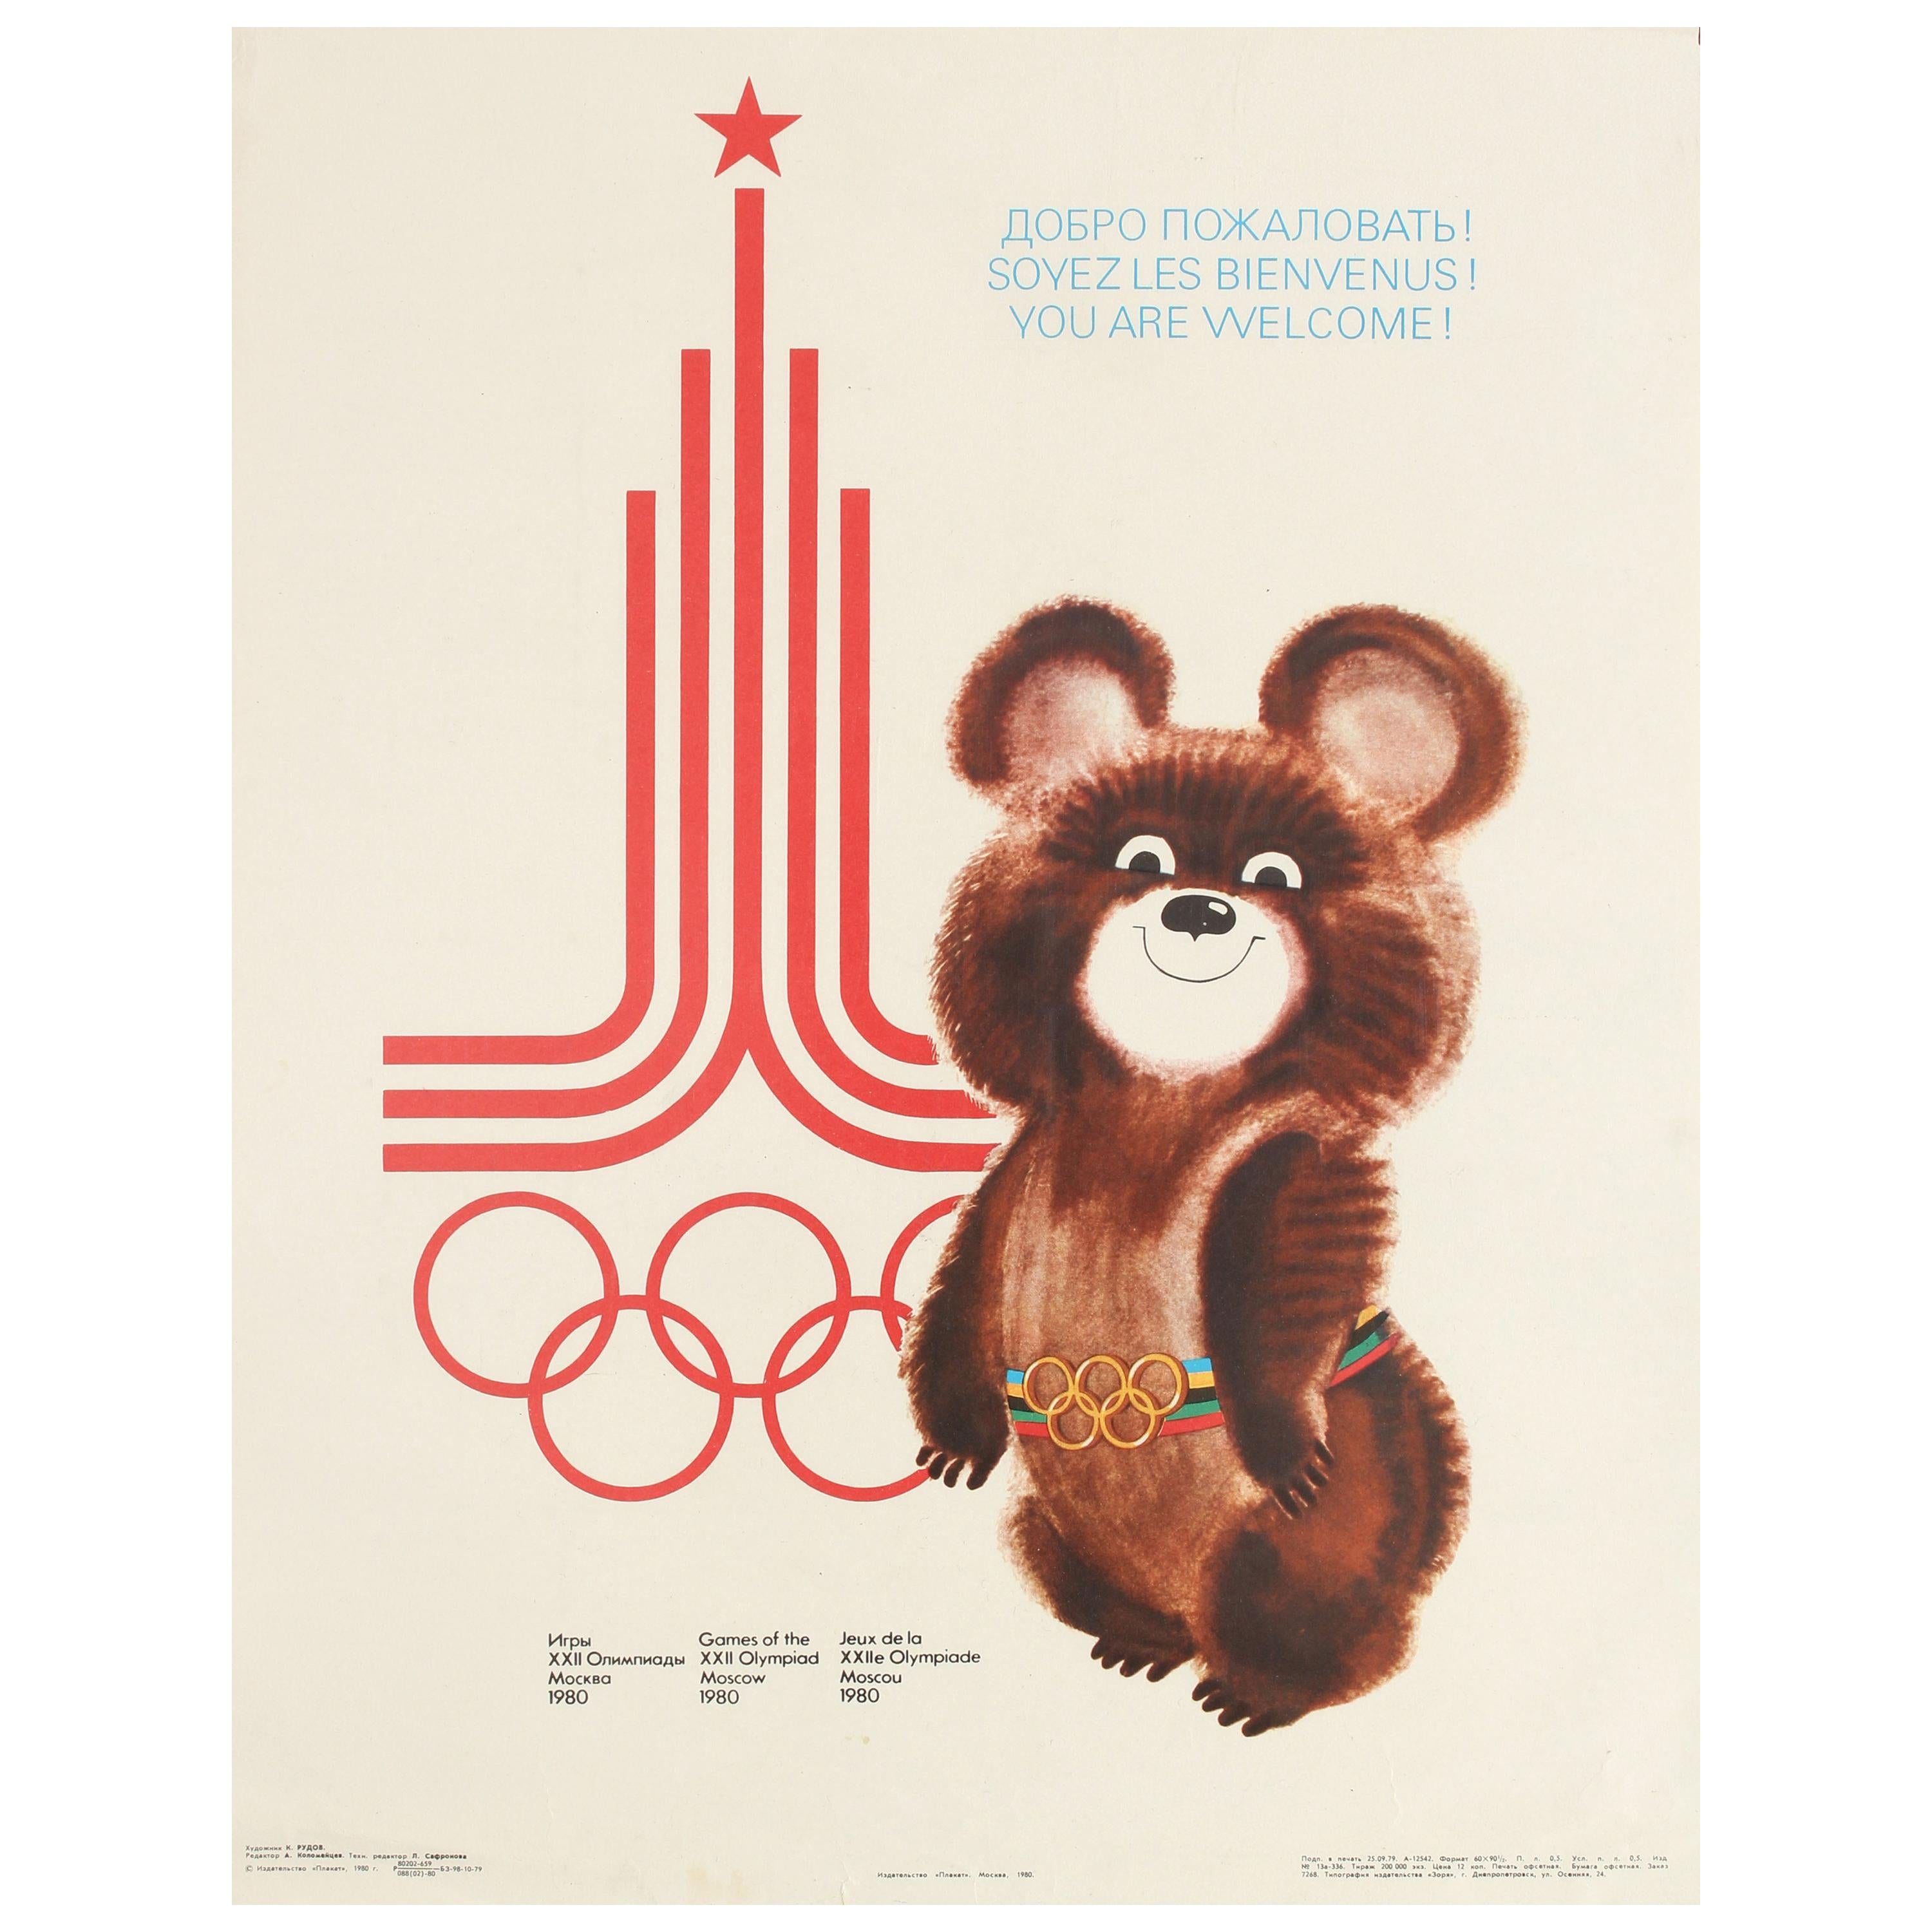 Original Vintage Moscow Summer Olympic Games Poster Misha Bear Mascot - Welcome!